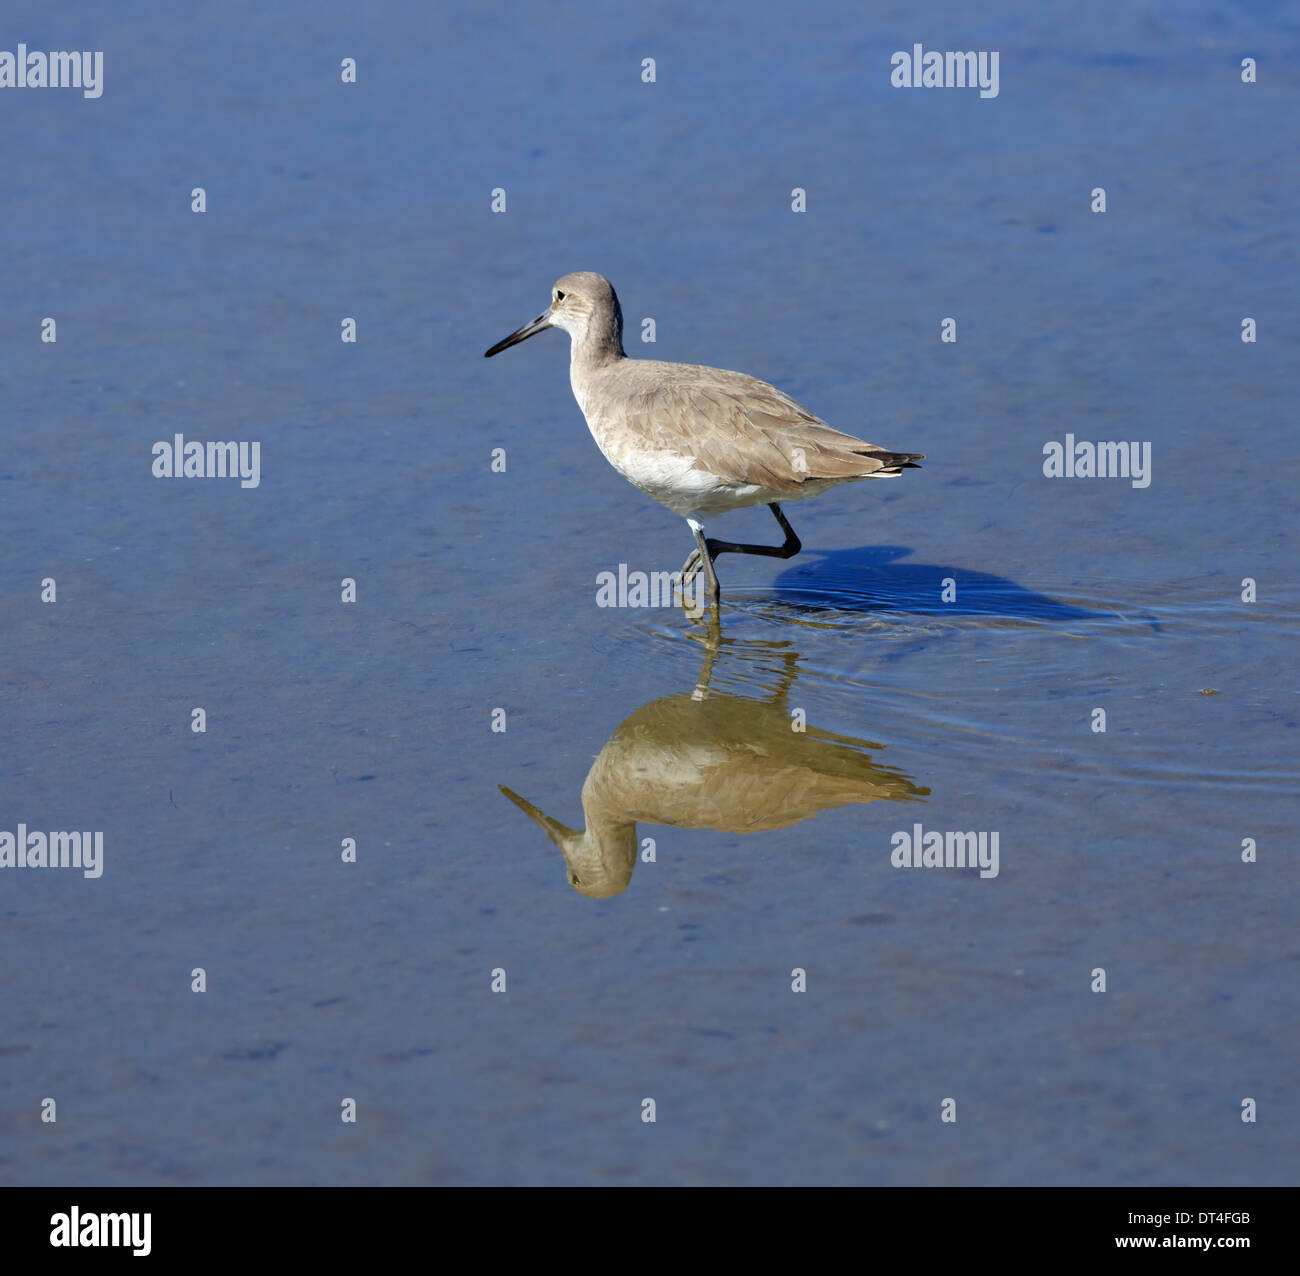 Willet (Tringa semipalmata) in winter plumage on South Padre Island, Texas Stock Photo